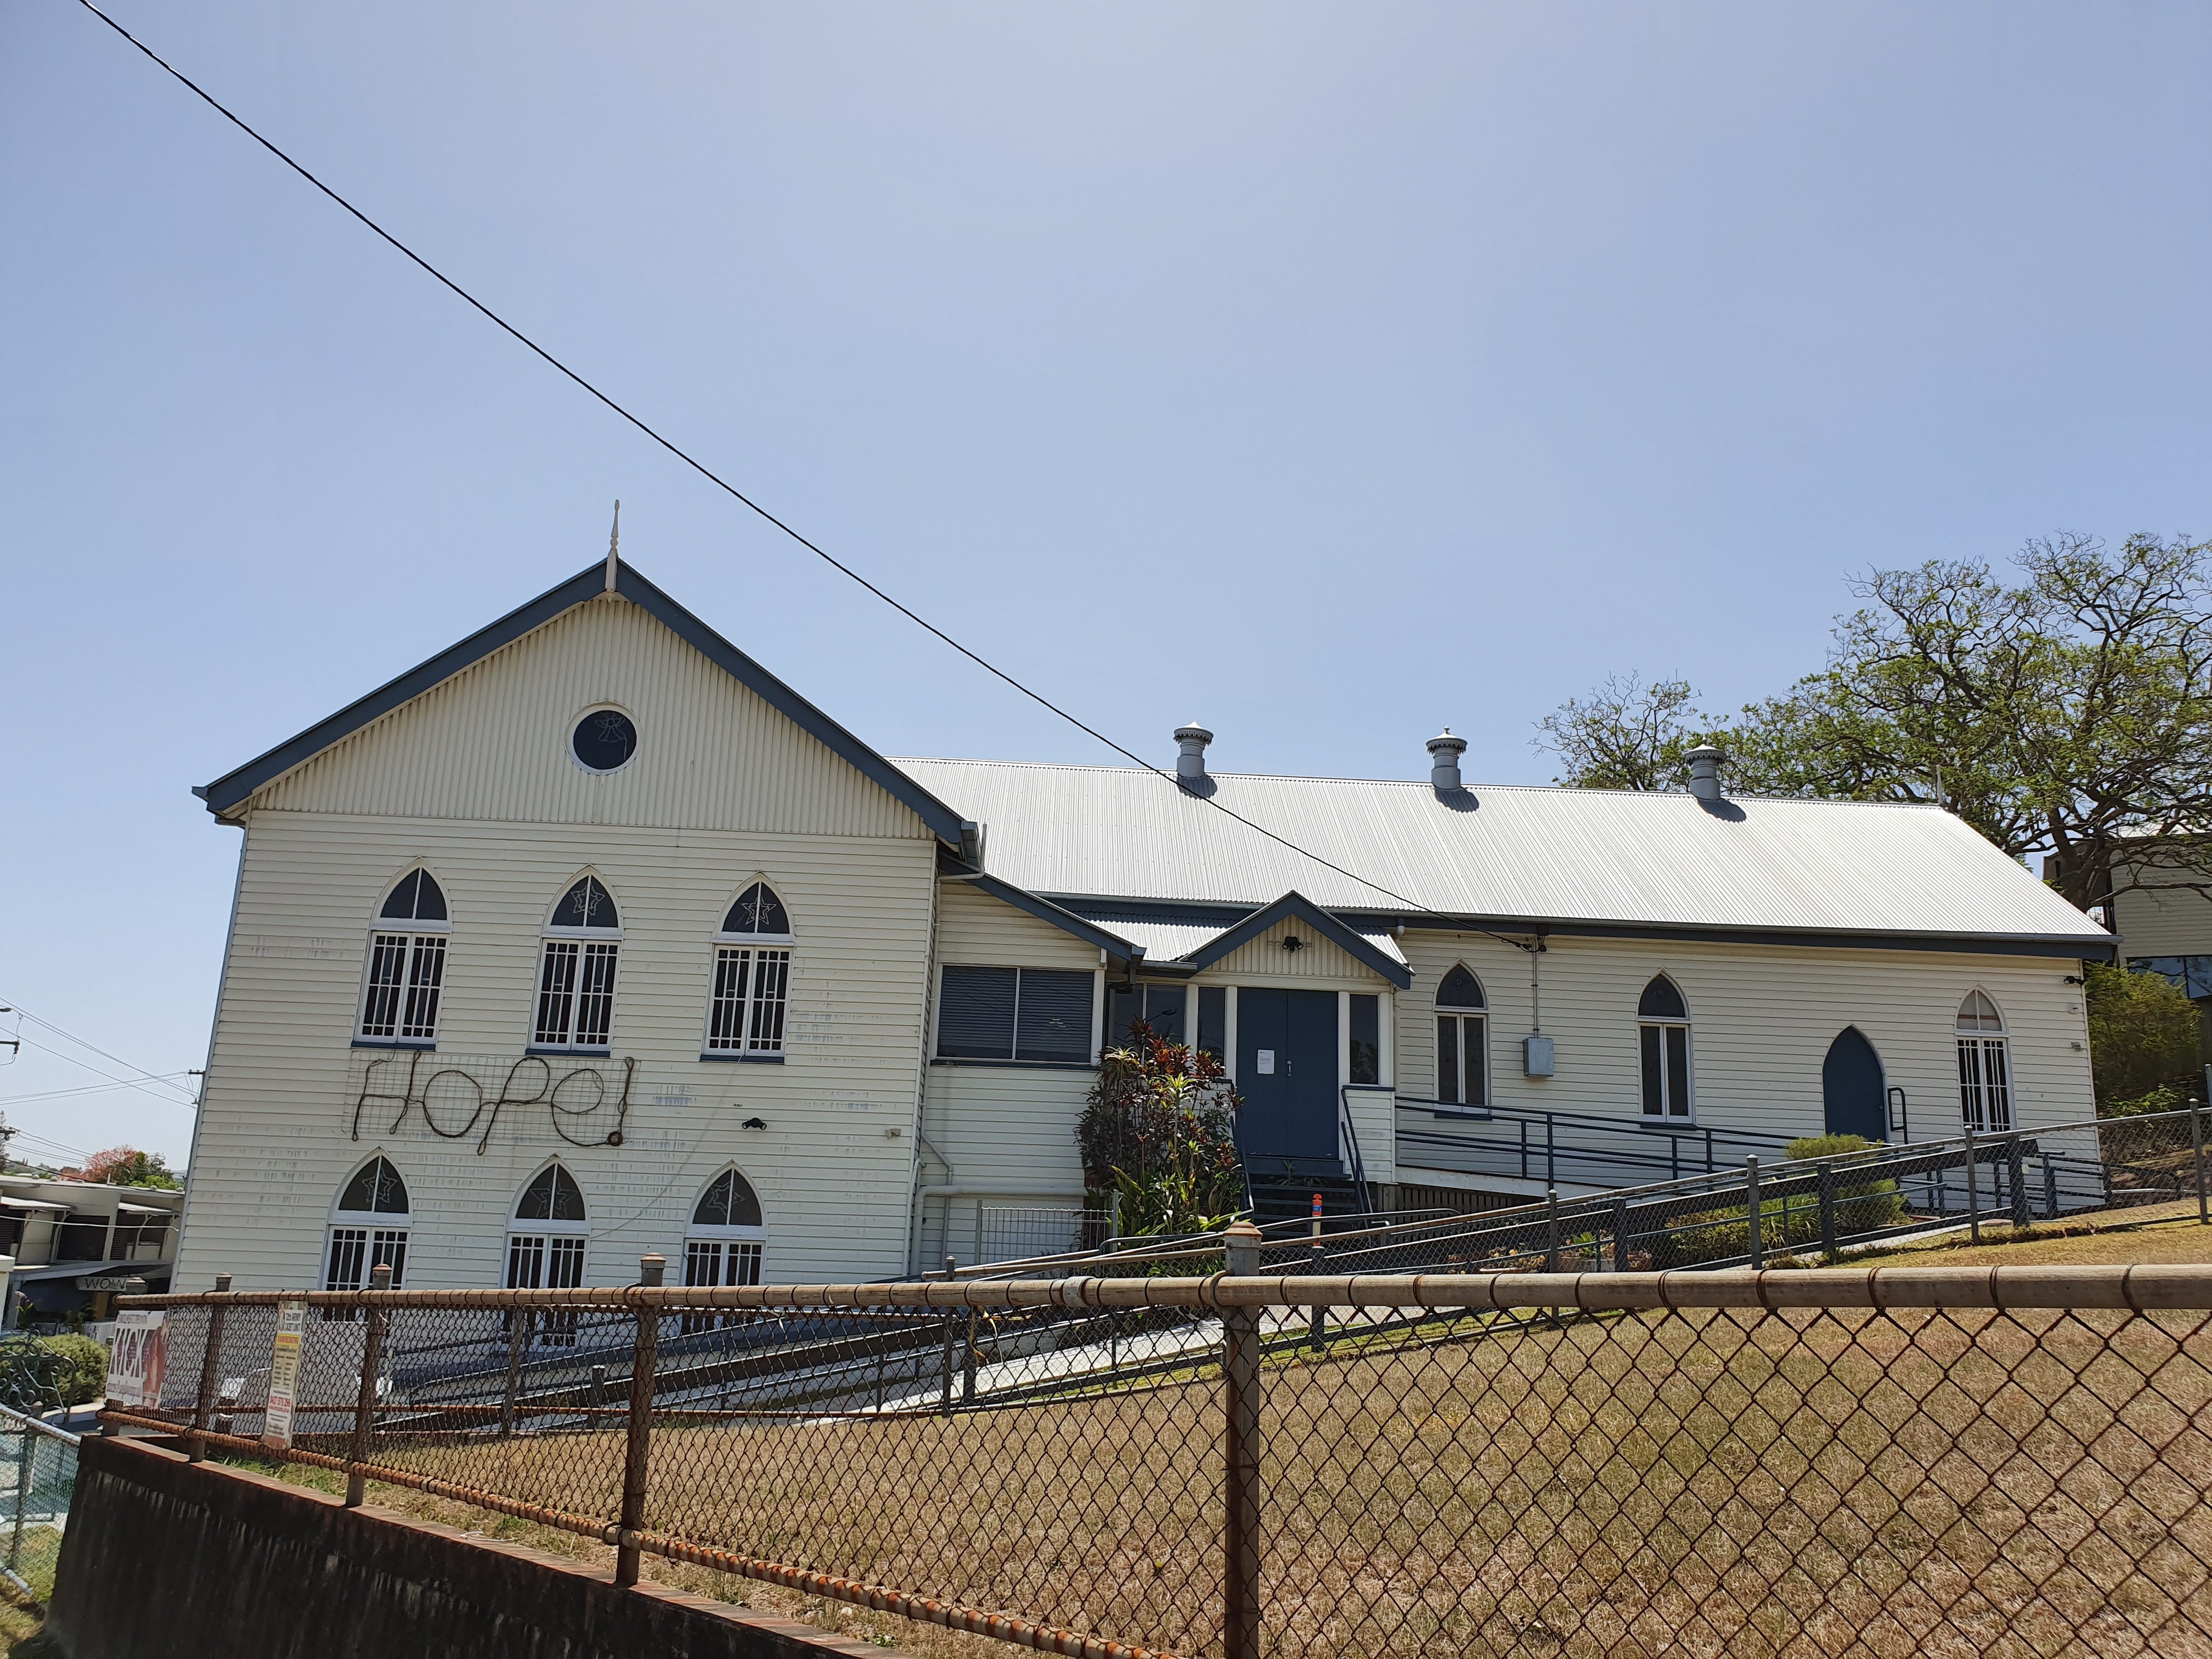 This is an image of the local heritage place known as Bulimba Uniting Church from Lytton Road